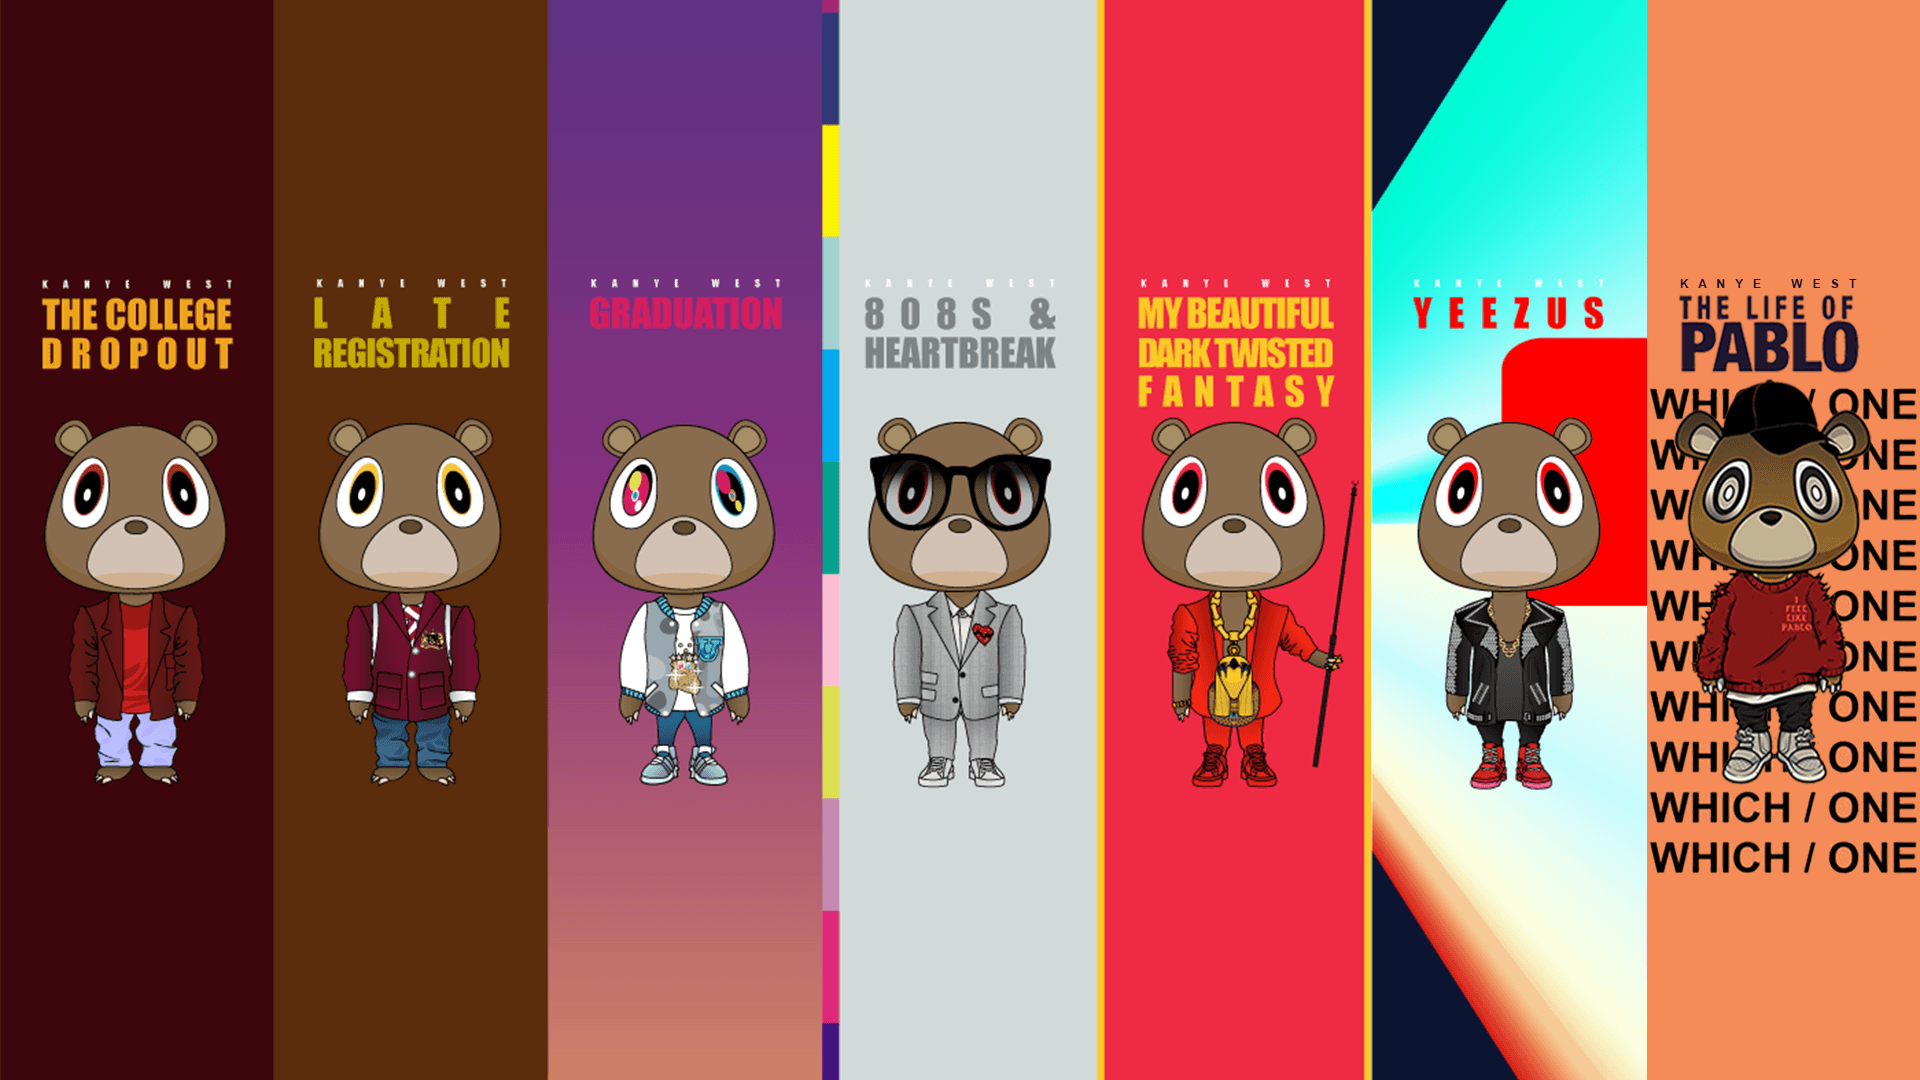 My attempt at making the Kanye wallpaper with The Life of Pablo